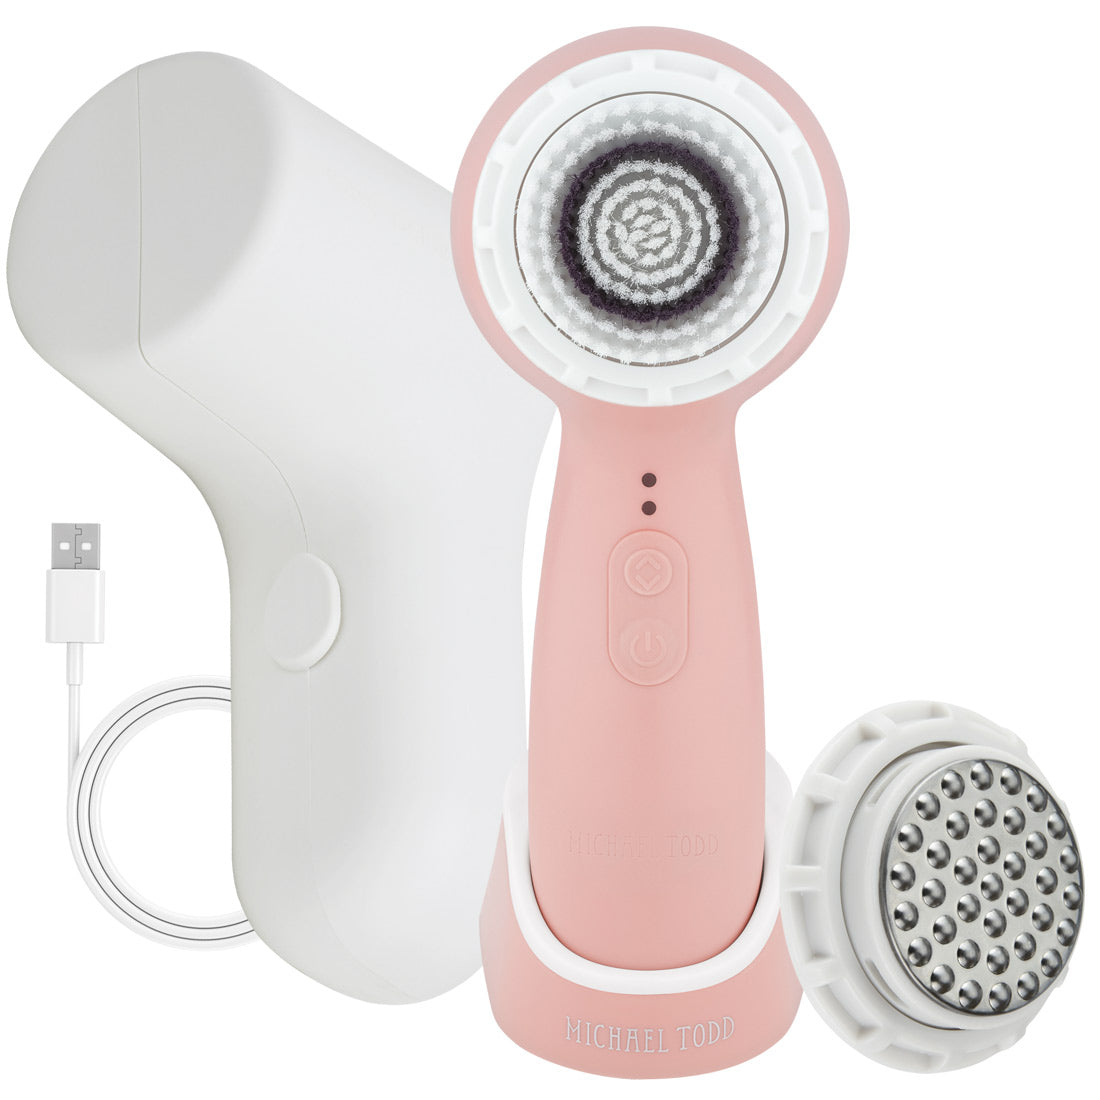 Millennial Pink Soniclear Petite Sonic Facial Cleansing Brush